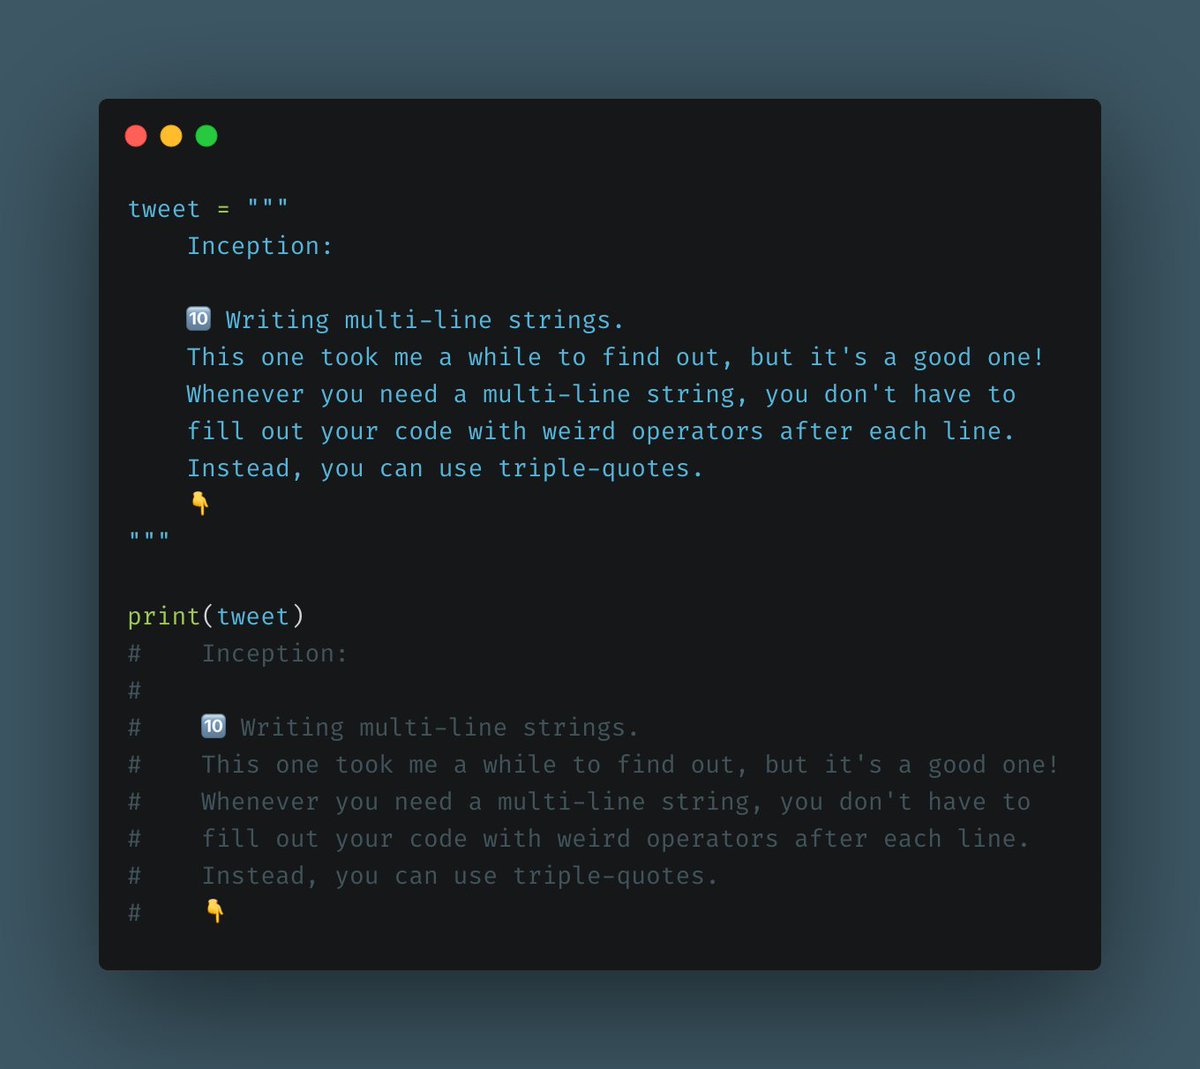 Writing multi-line strings.This one took me a while to find out, but it's a good one! Whenever you need a multi-line string, you don't have to fill out your code with weird operators after each line. Instead, you can use triple-quotes.